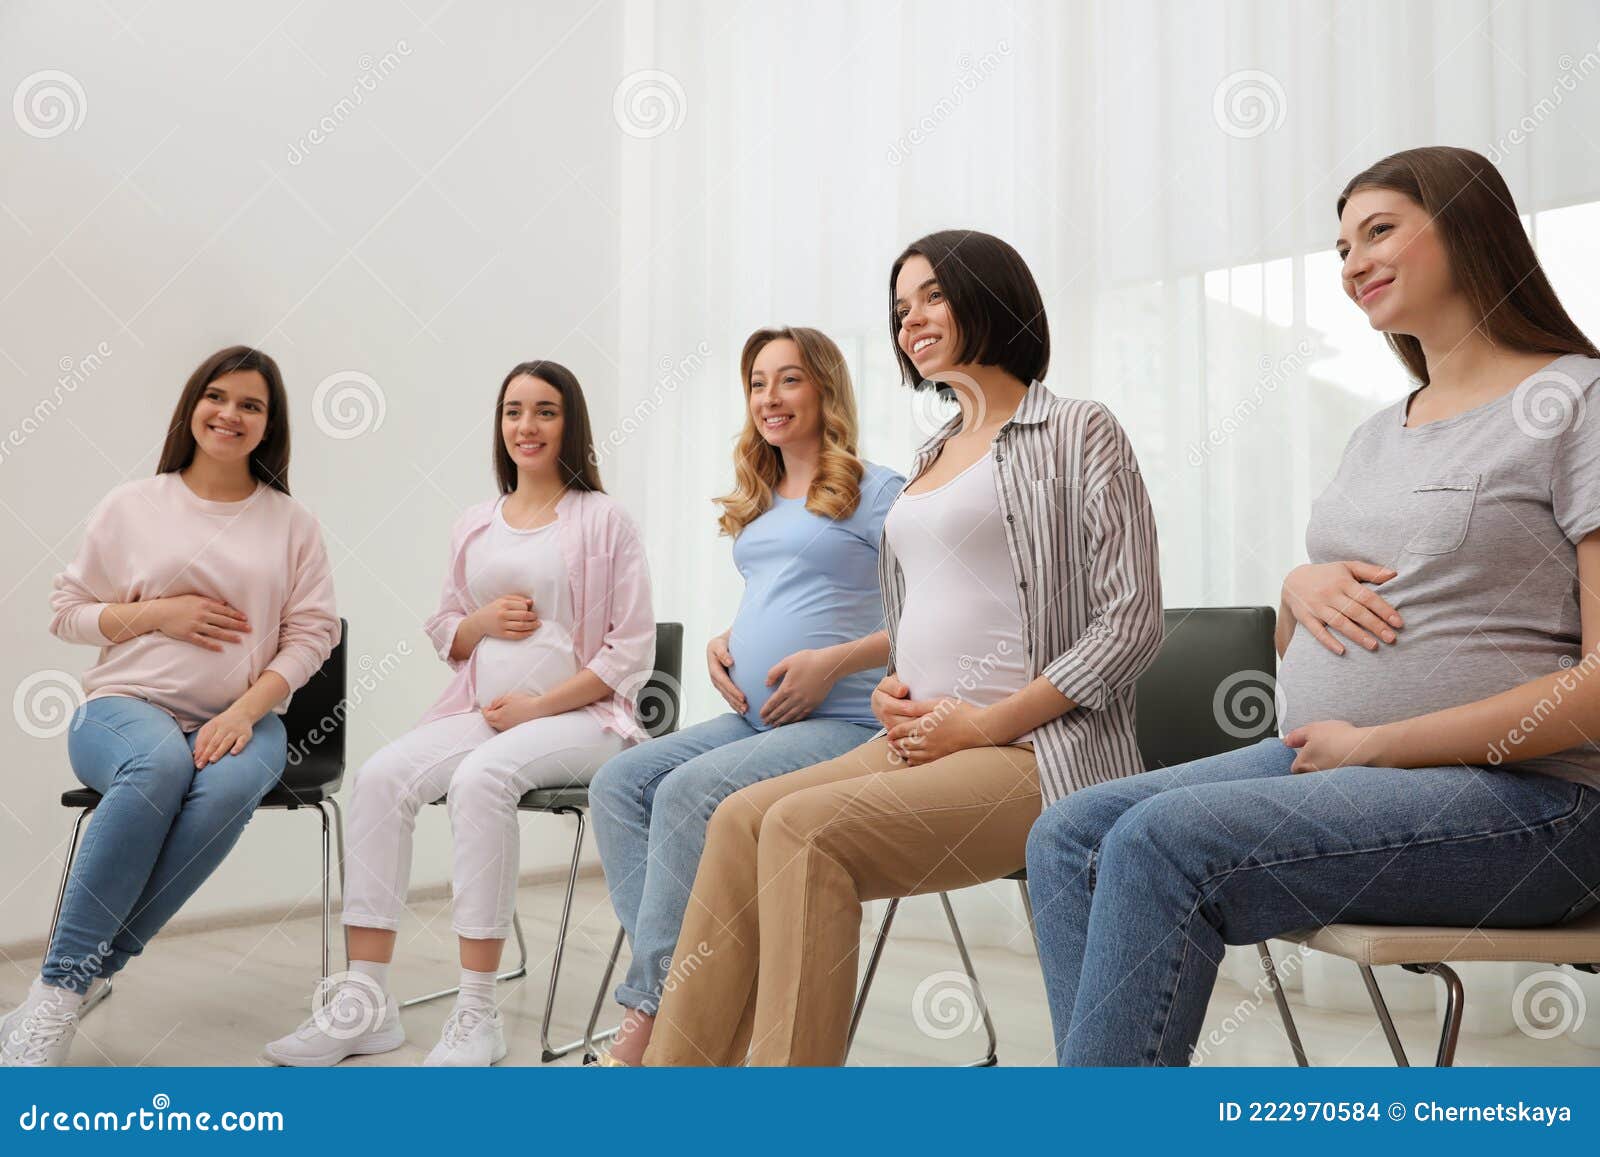 Group of Pregnant Women at Courses for Expectant Mothers Stock